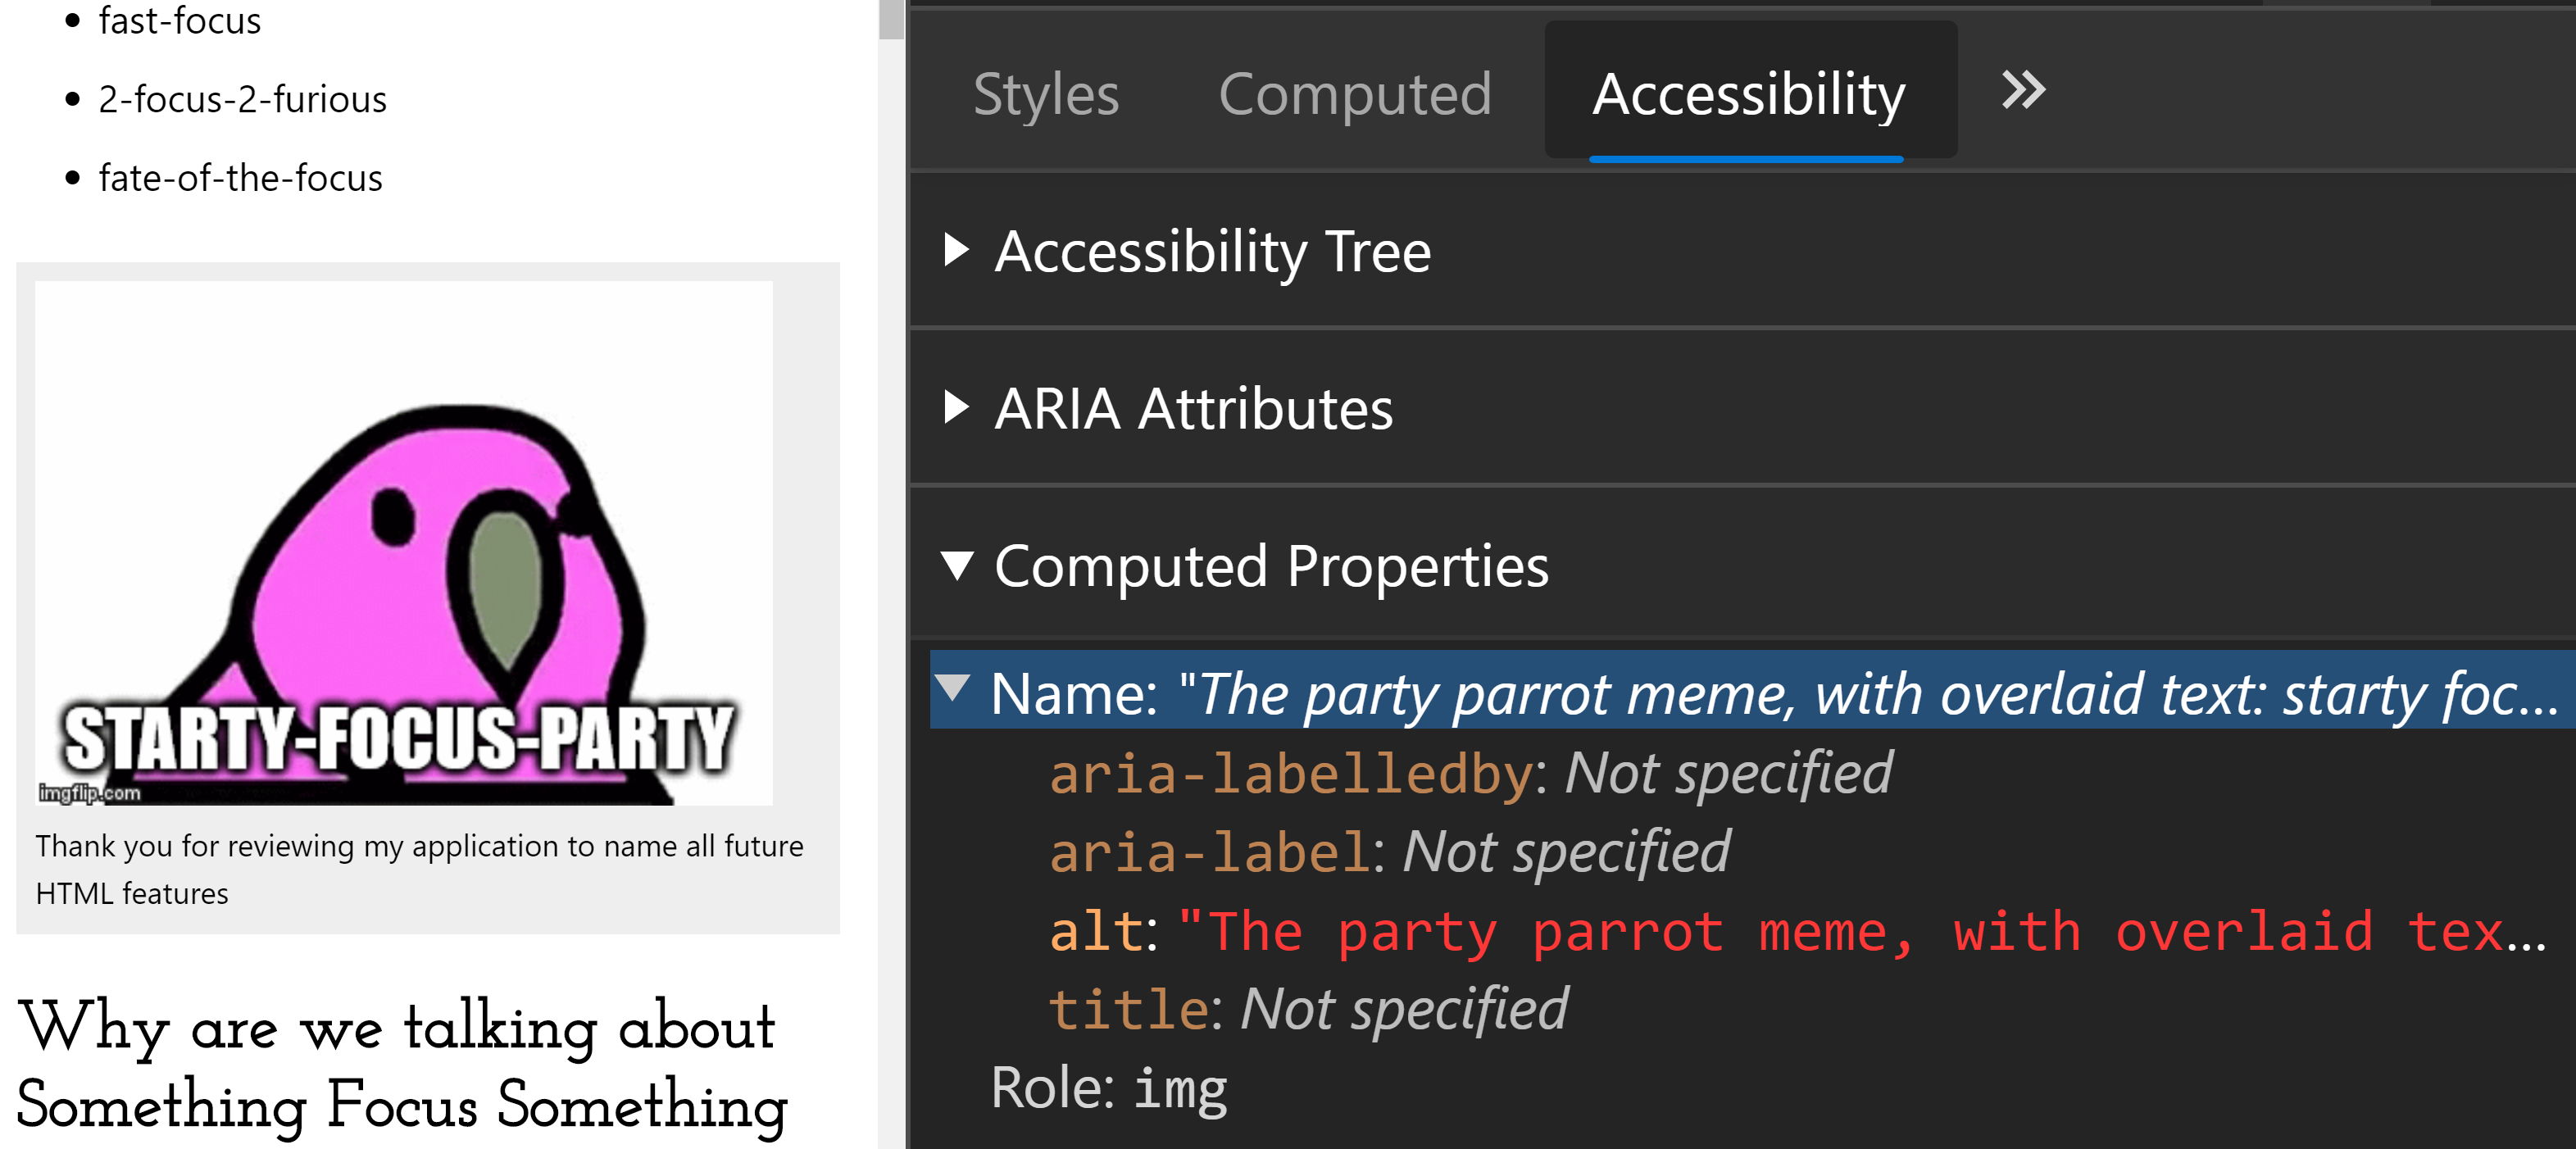 the same party parrot screenshot, with the computed name in dev tools expanded to show the alt attribute defined underneath